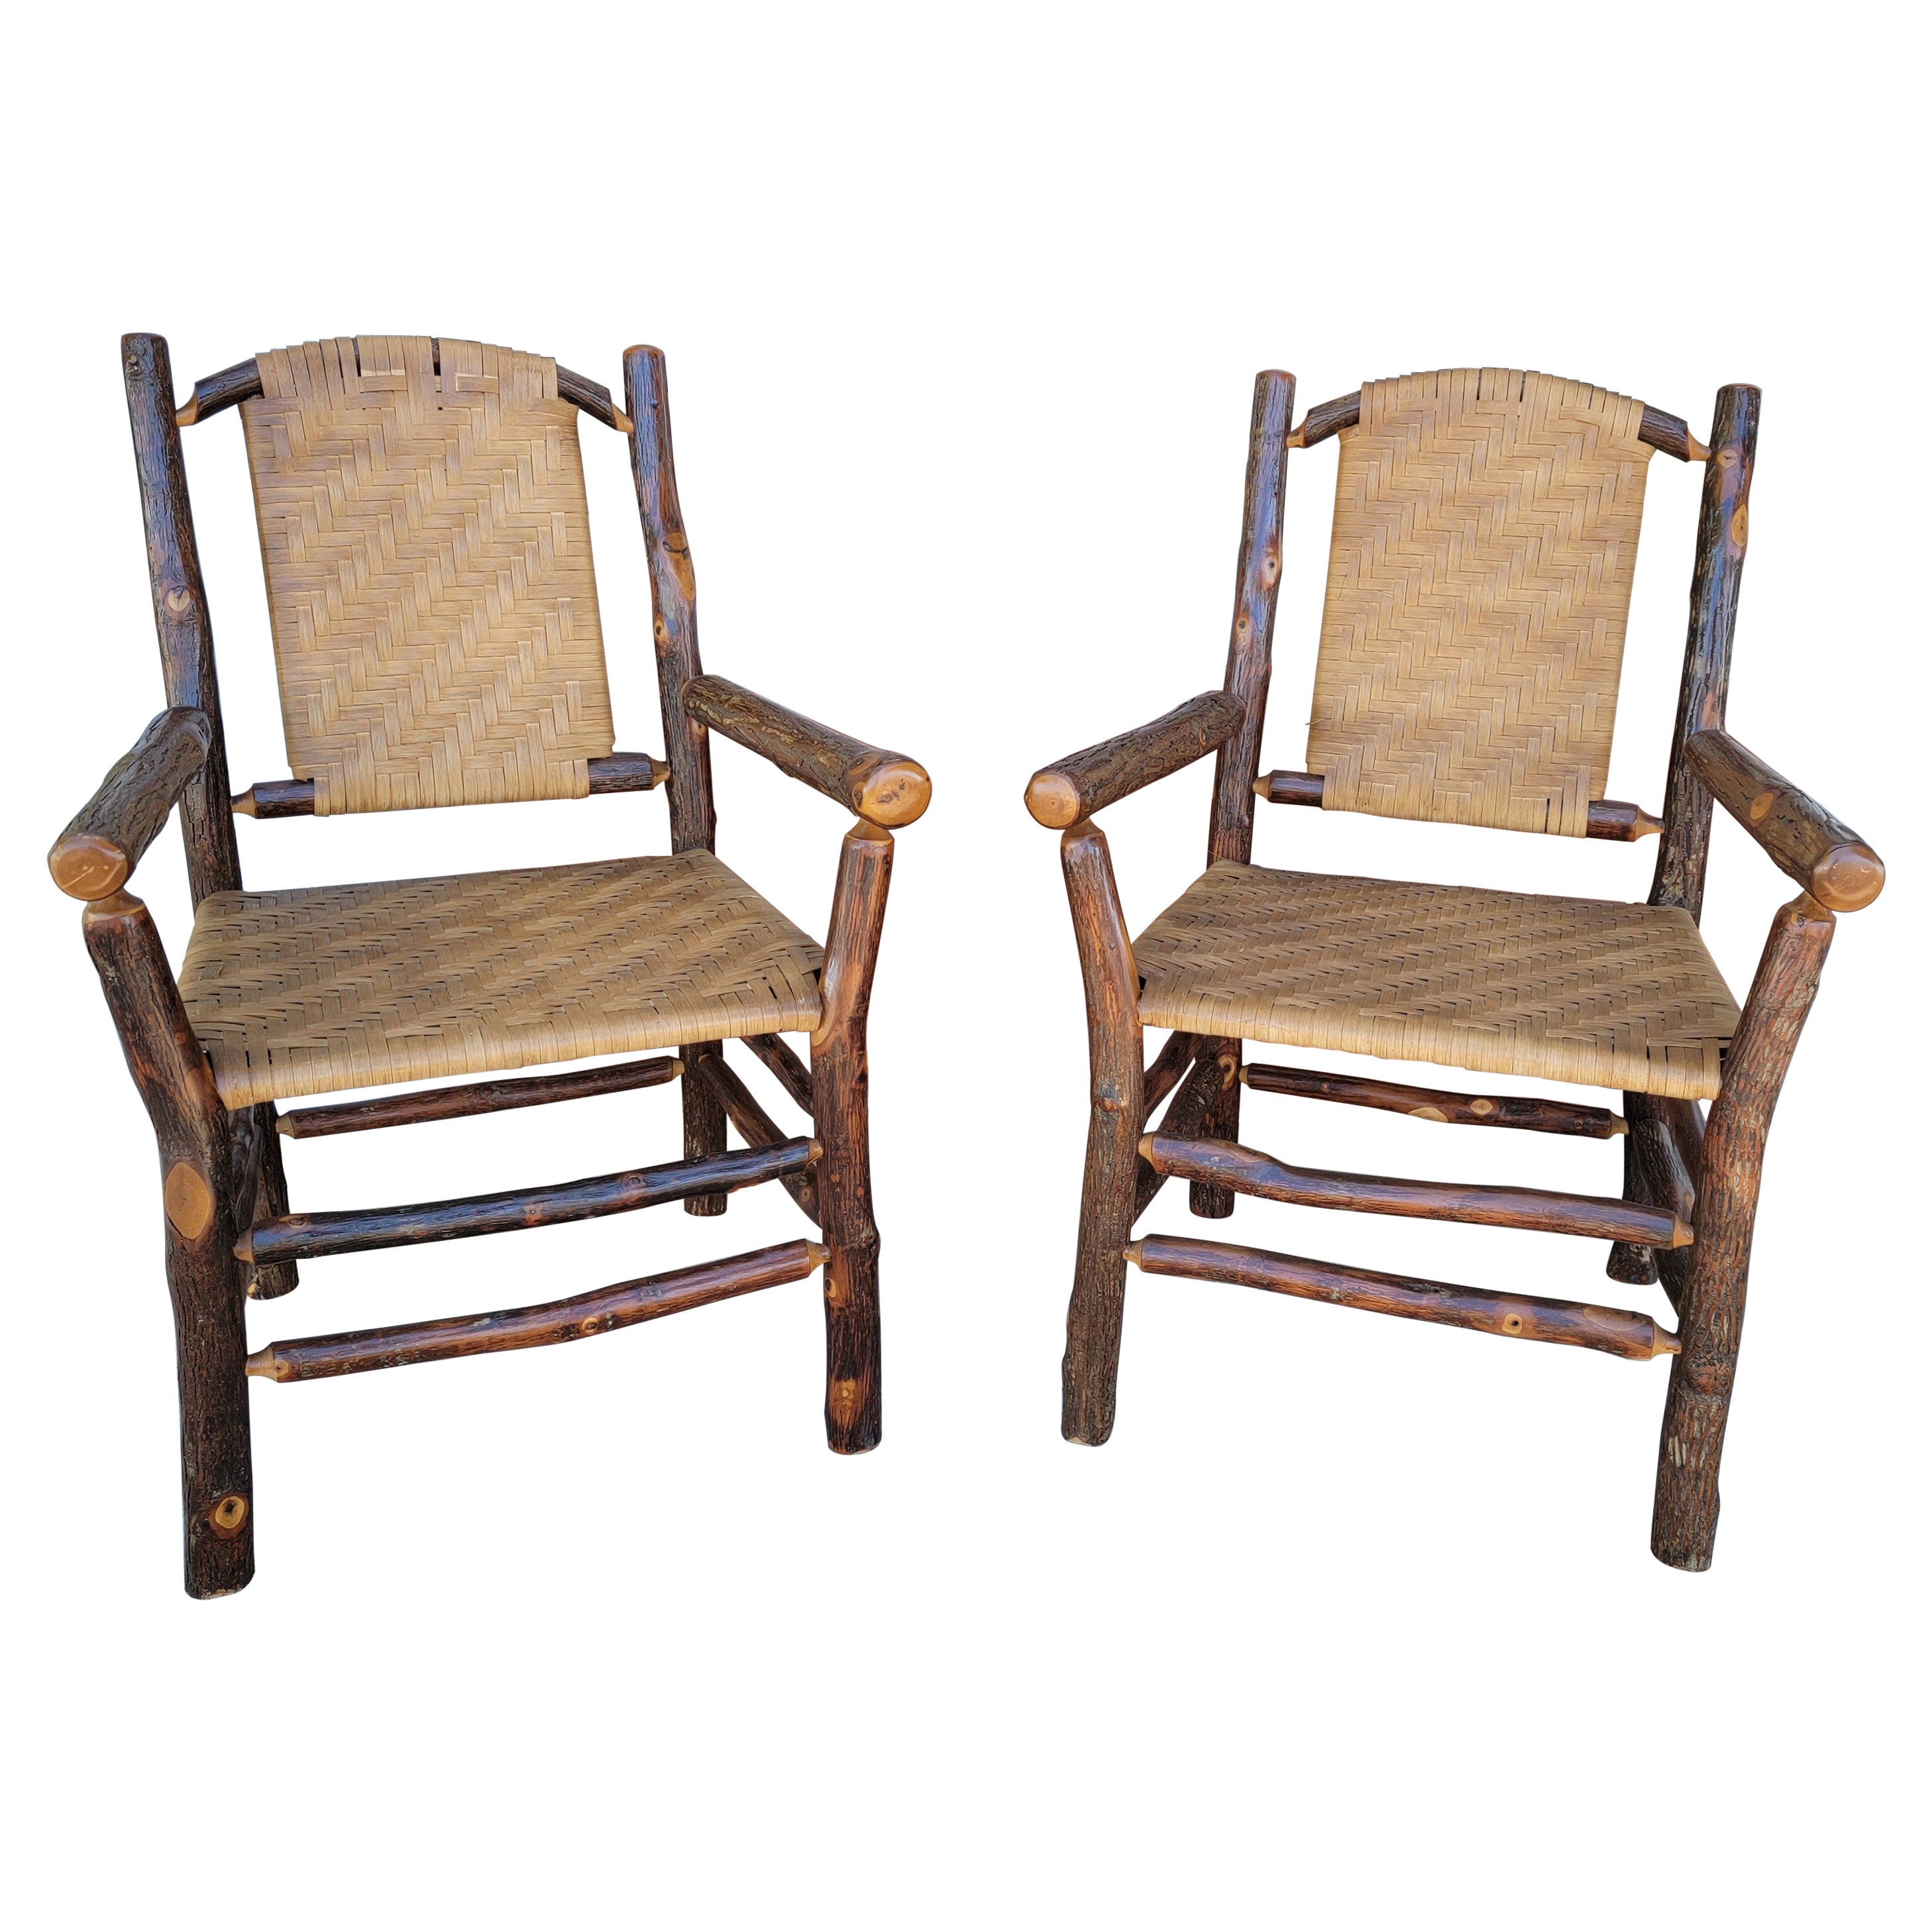 Pair of Old Hickory/Rush Arm Chairs